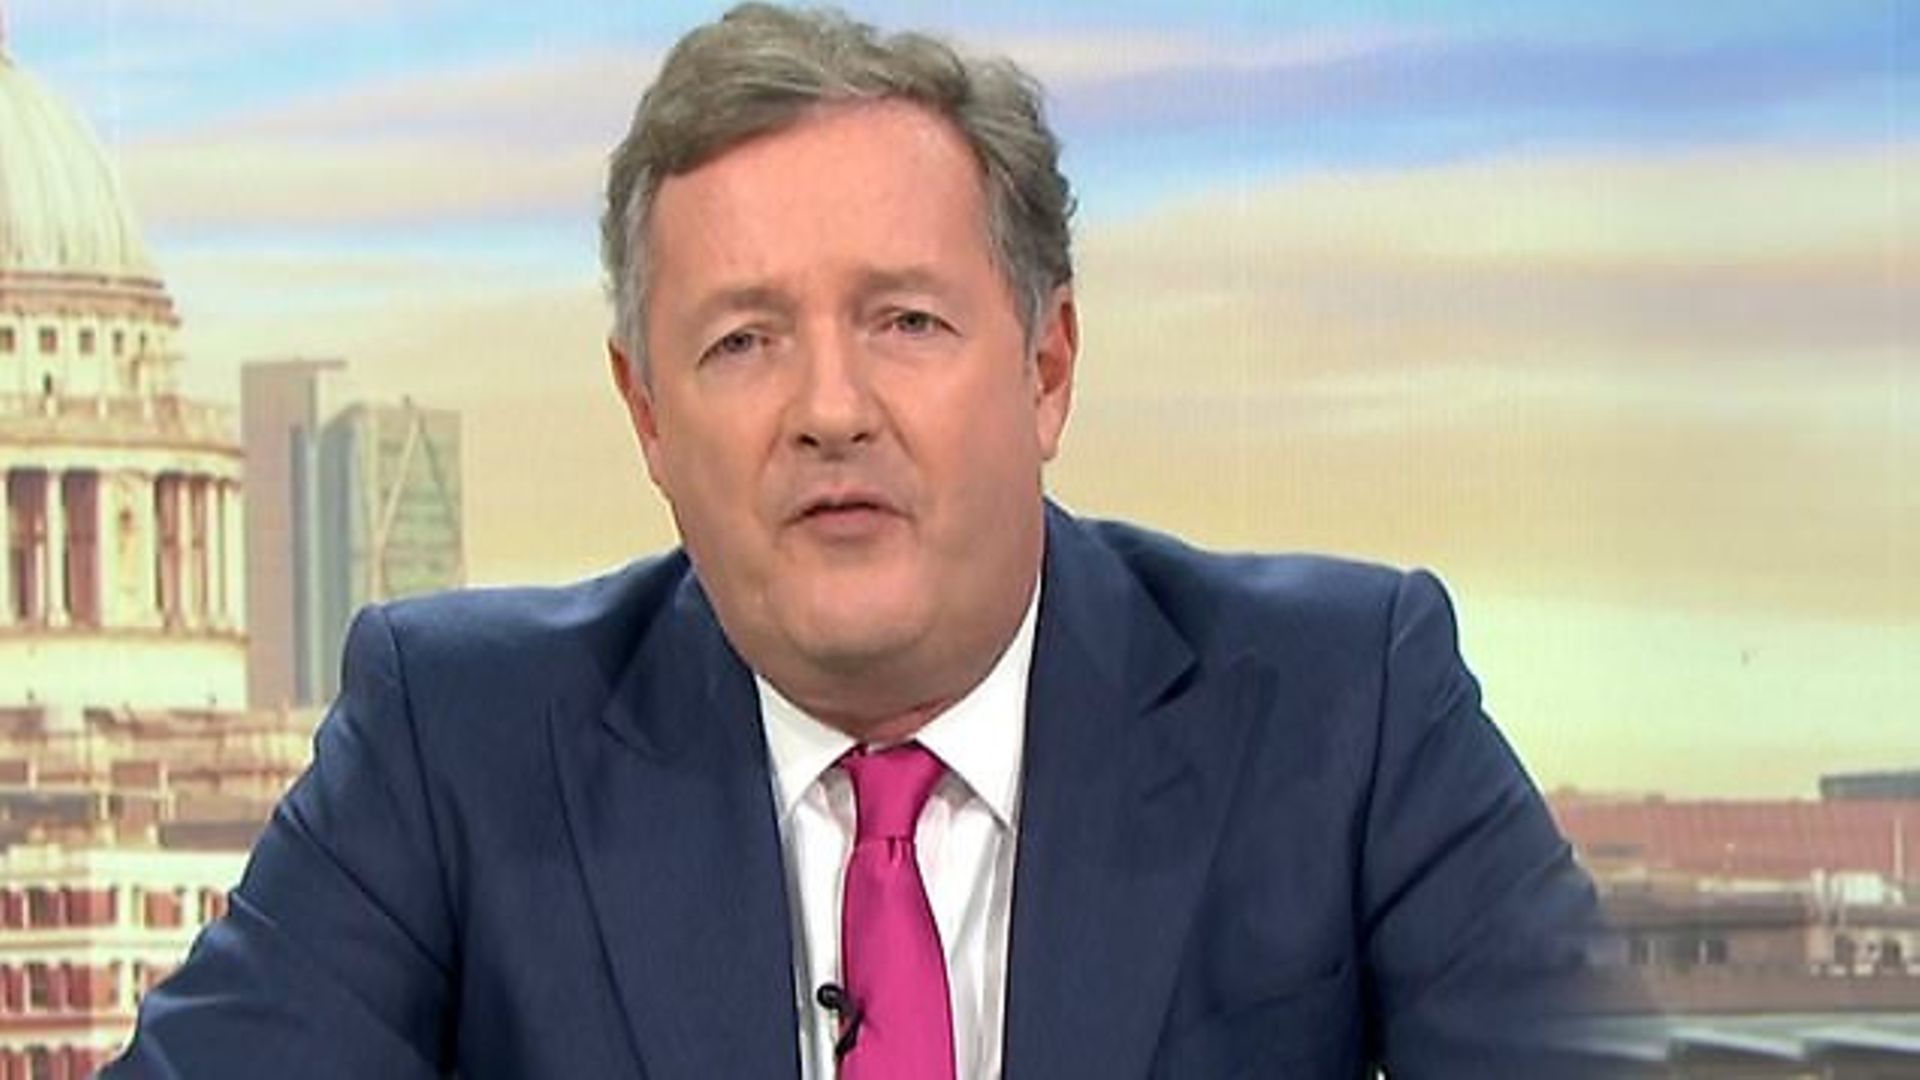 Piers Morgan appears on Good Morning Britain - Credit: ITV